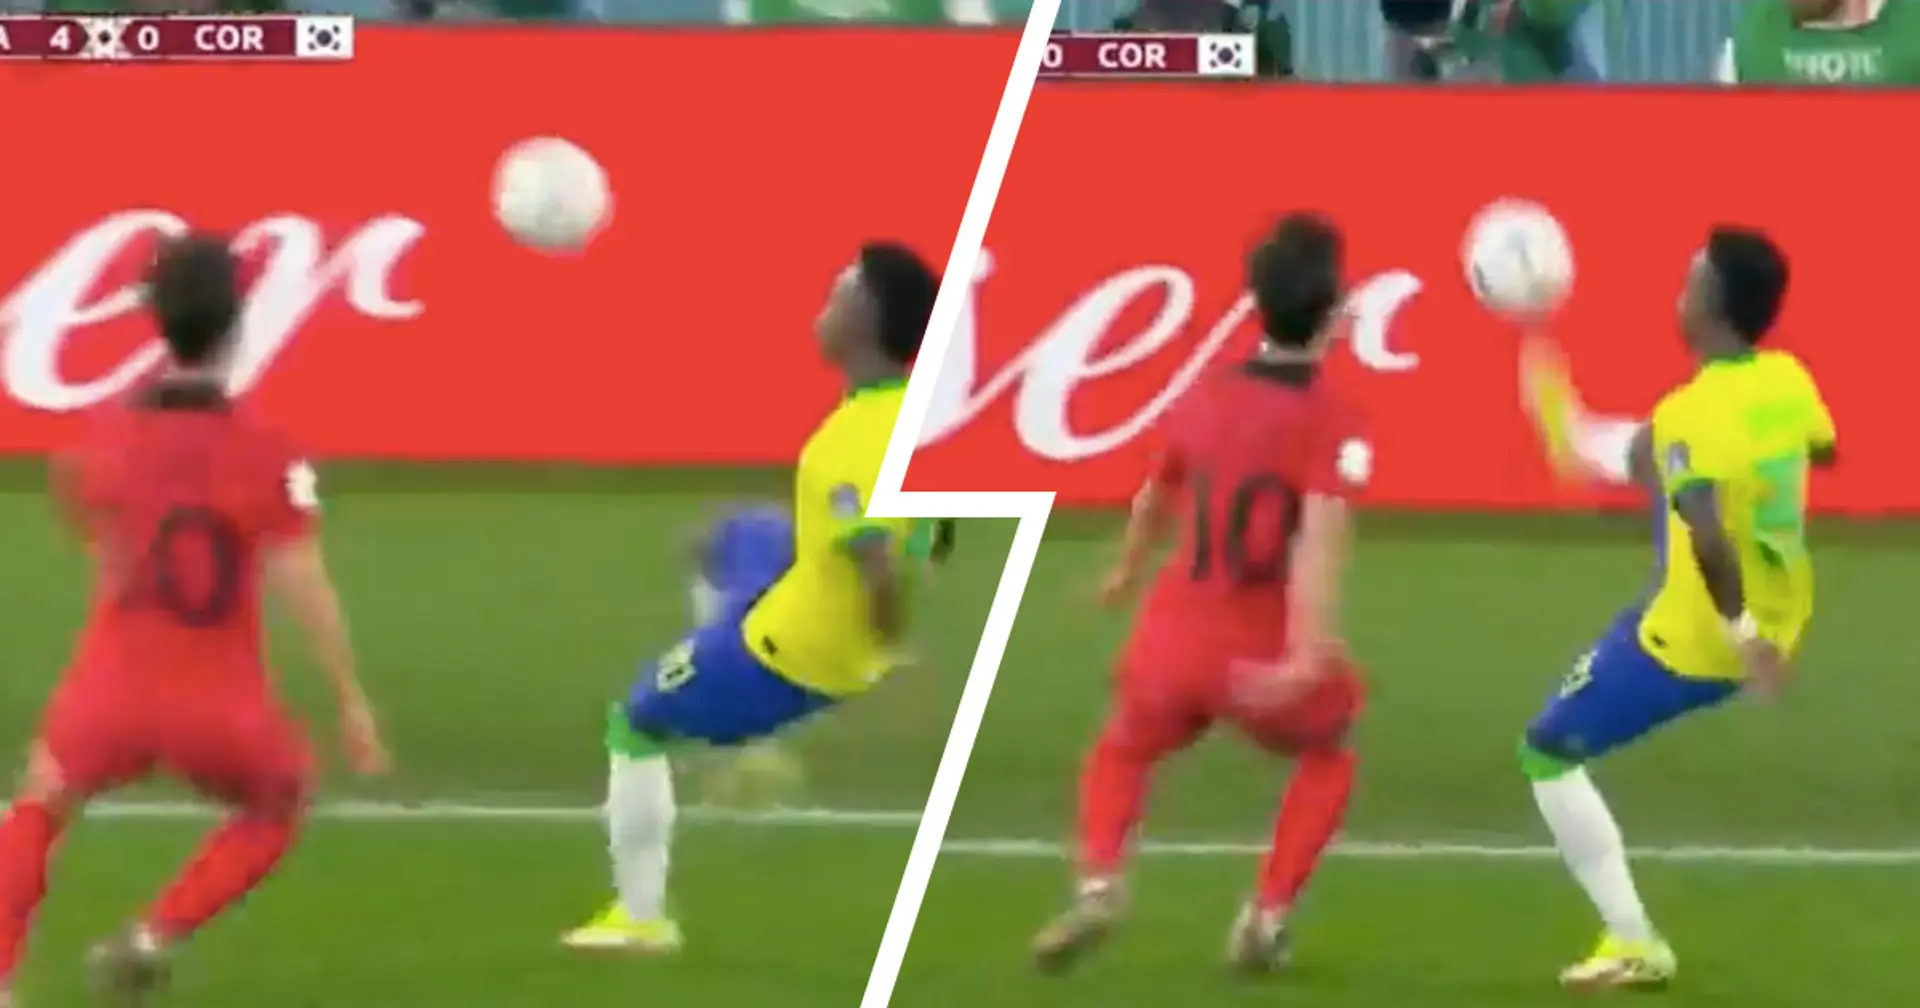 'I wish I was at least 1% as cool as him': Vinicius' cheeky skill in World Cup last 16 goes viral